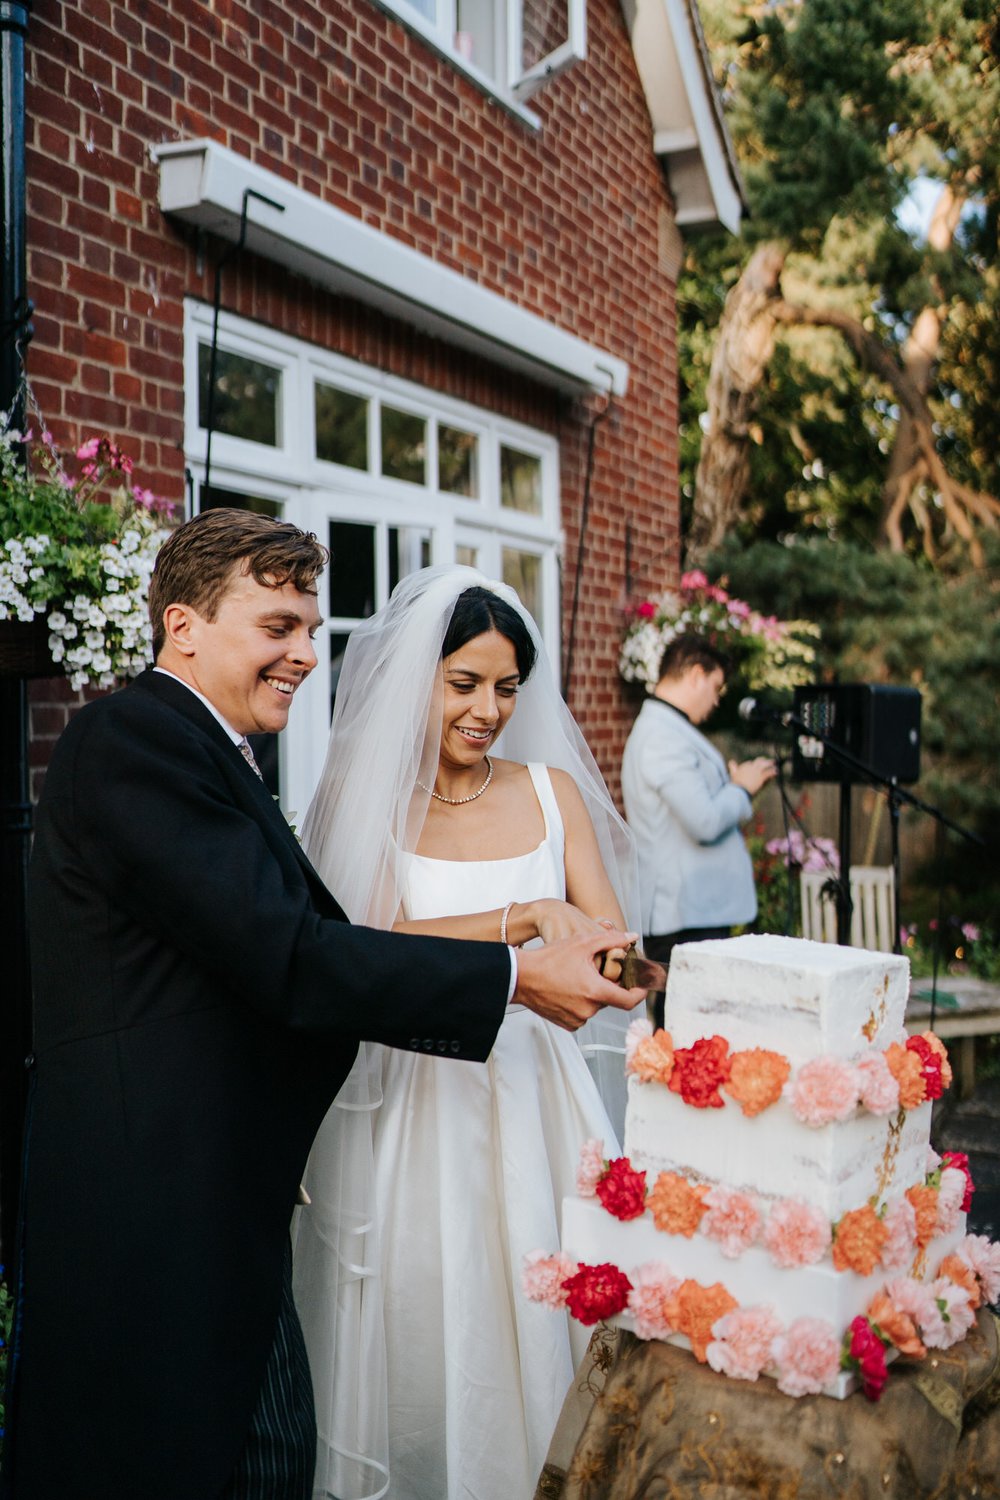 Bride and groom cut the white wedding cake which is decorated with red and pink flowers